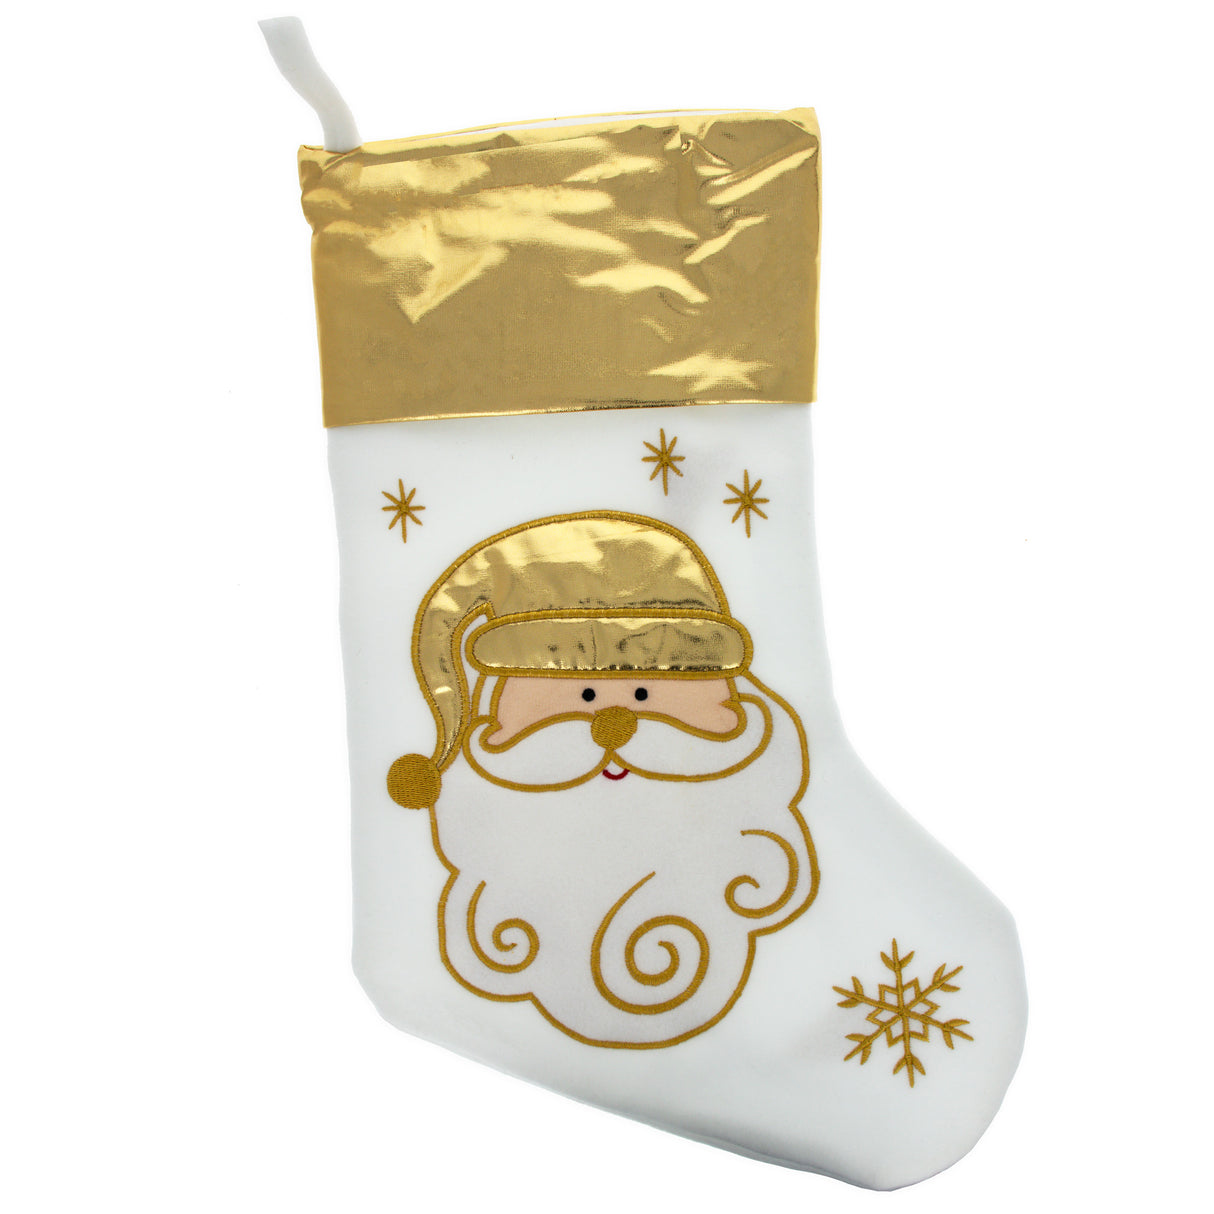 Set of 3 Gold and Silver, on White Felt Santa, Reindeer Christmas Stockings 15 Inches ,dimensions in inches: 15 x 12 x 1